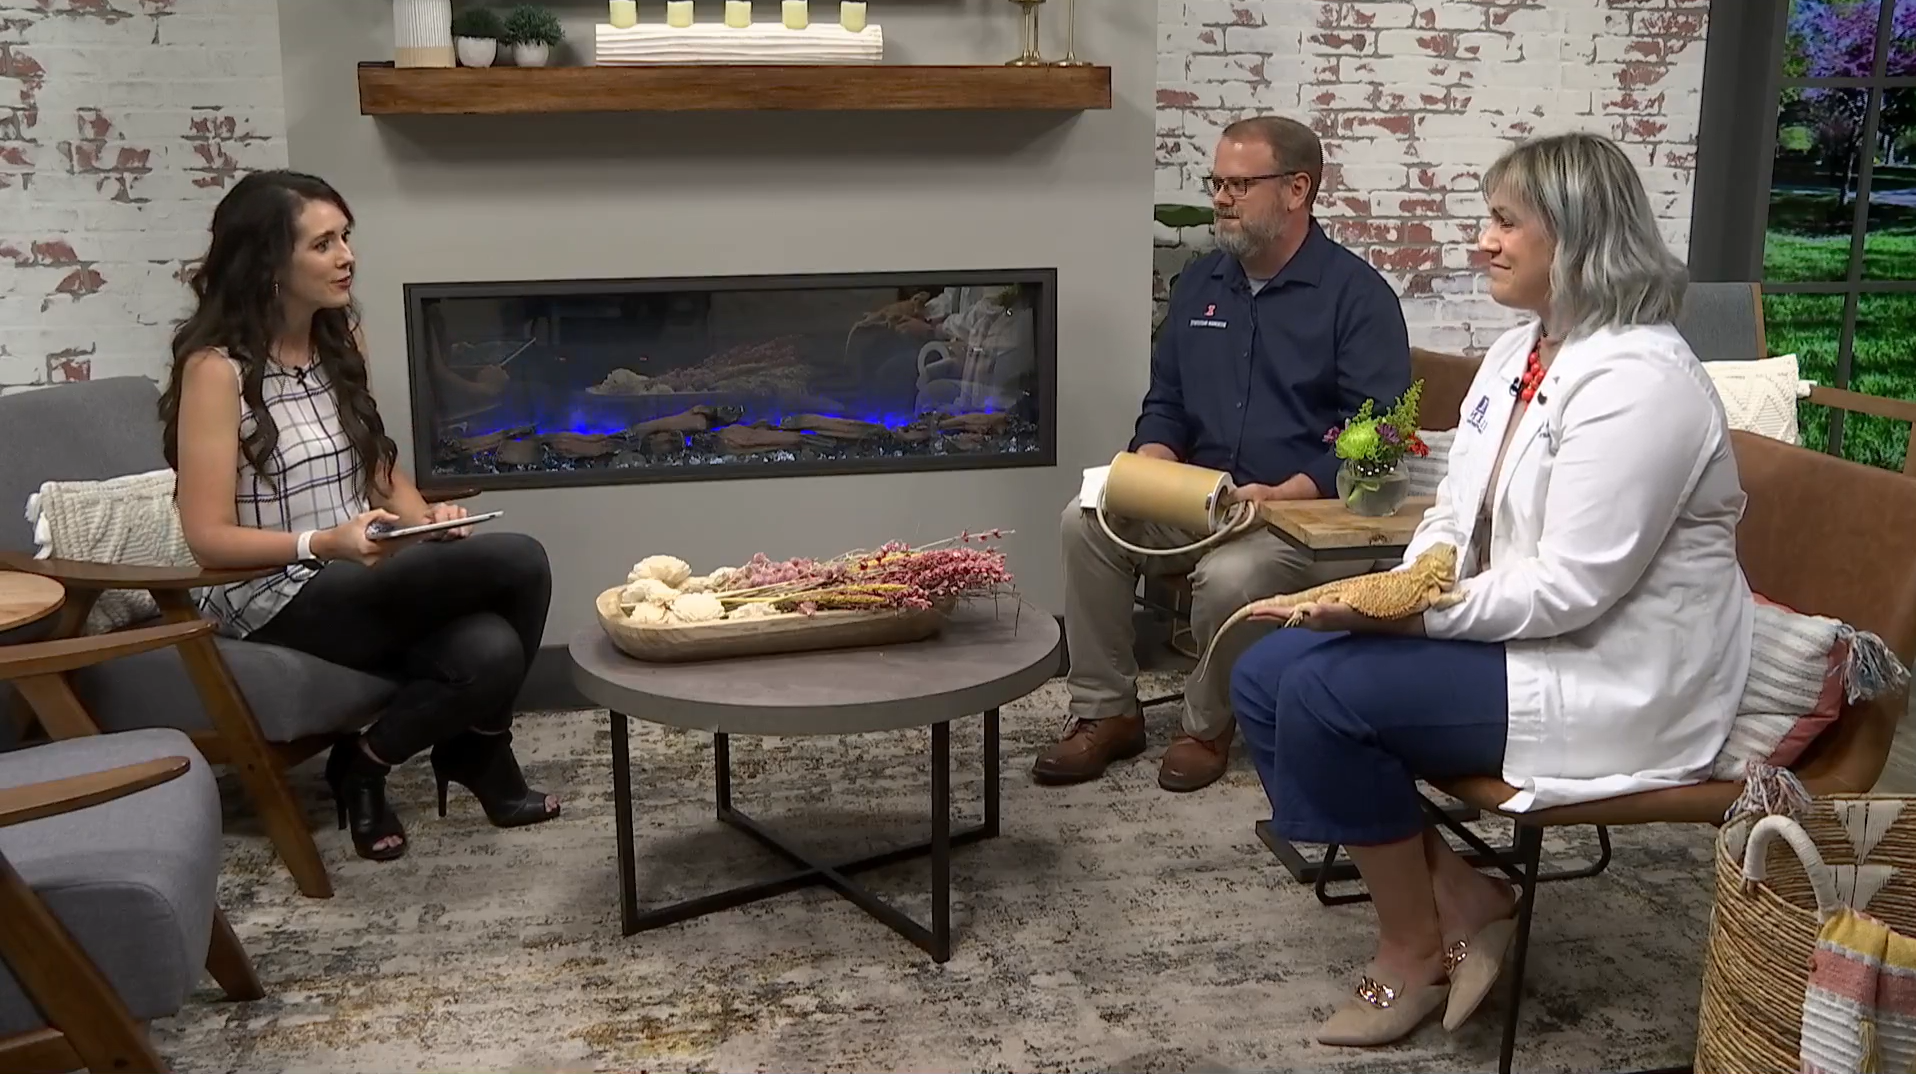 Brad Sutton and Kari Foss chat with host Heather Roberts on CiLiving's Fur-ever Family segment.